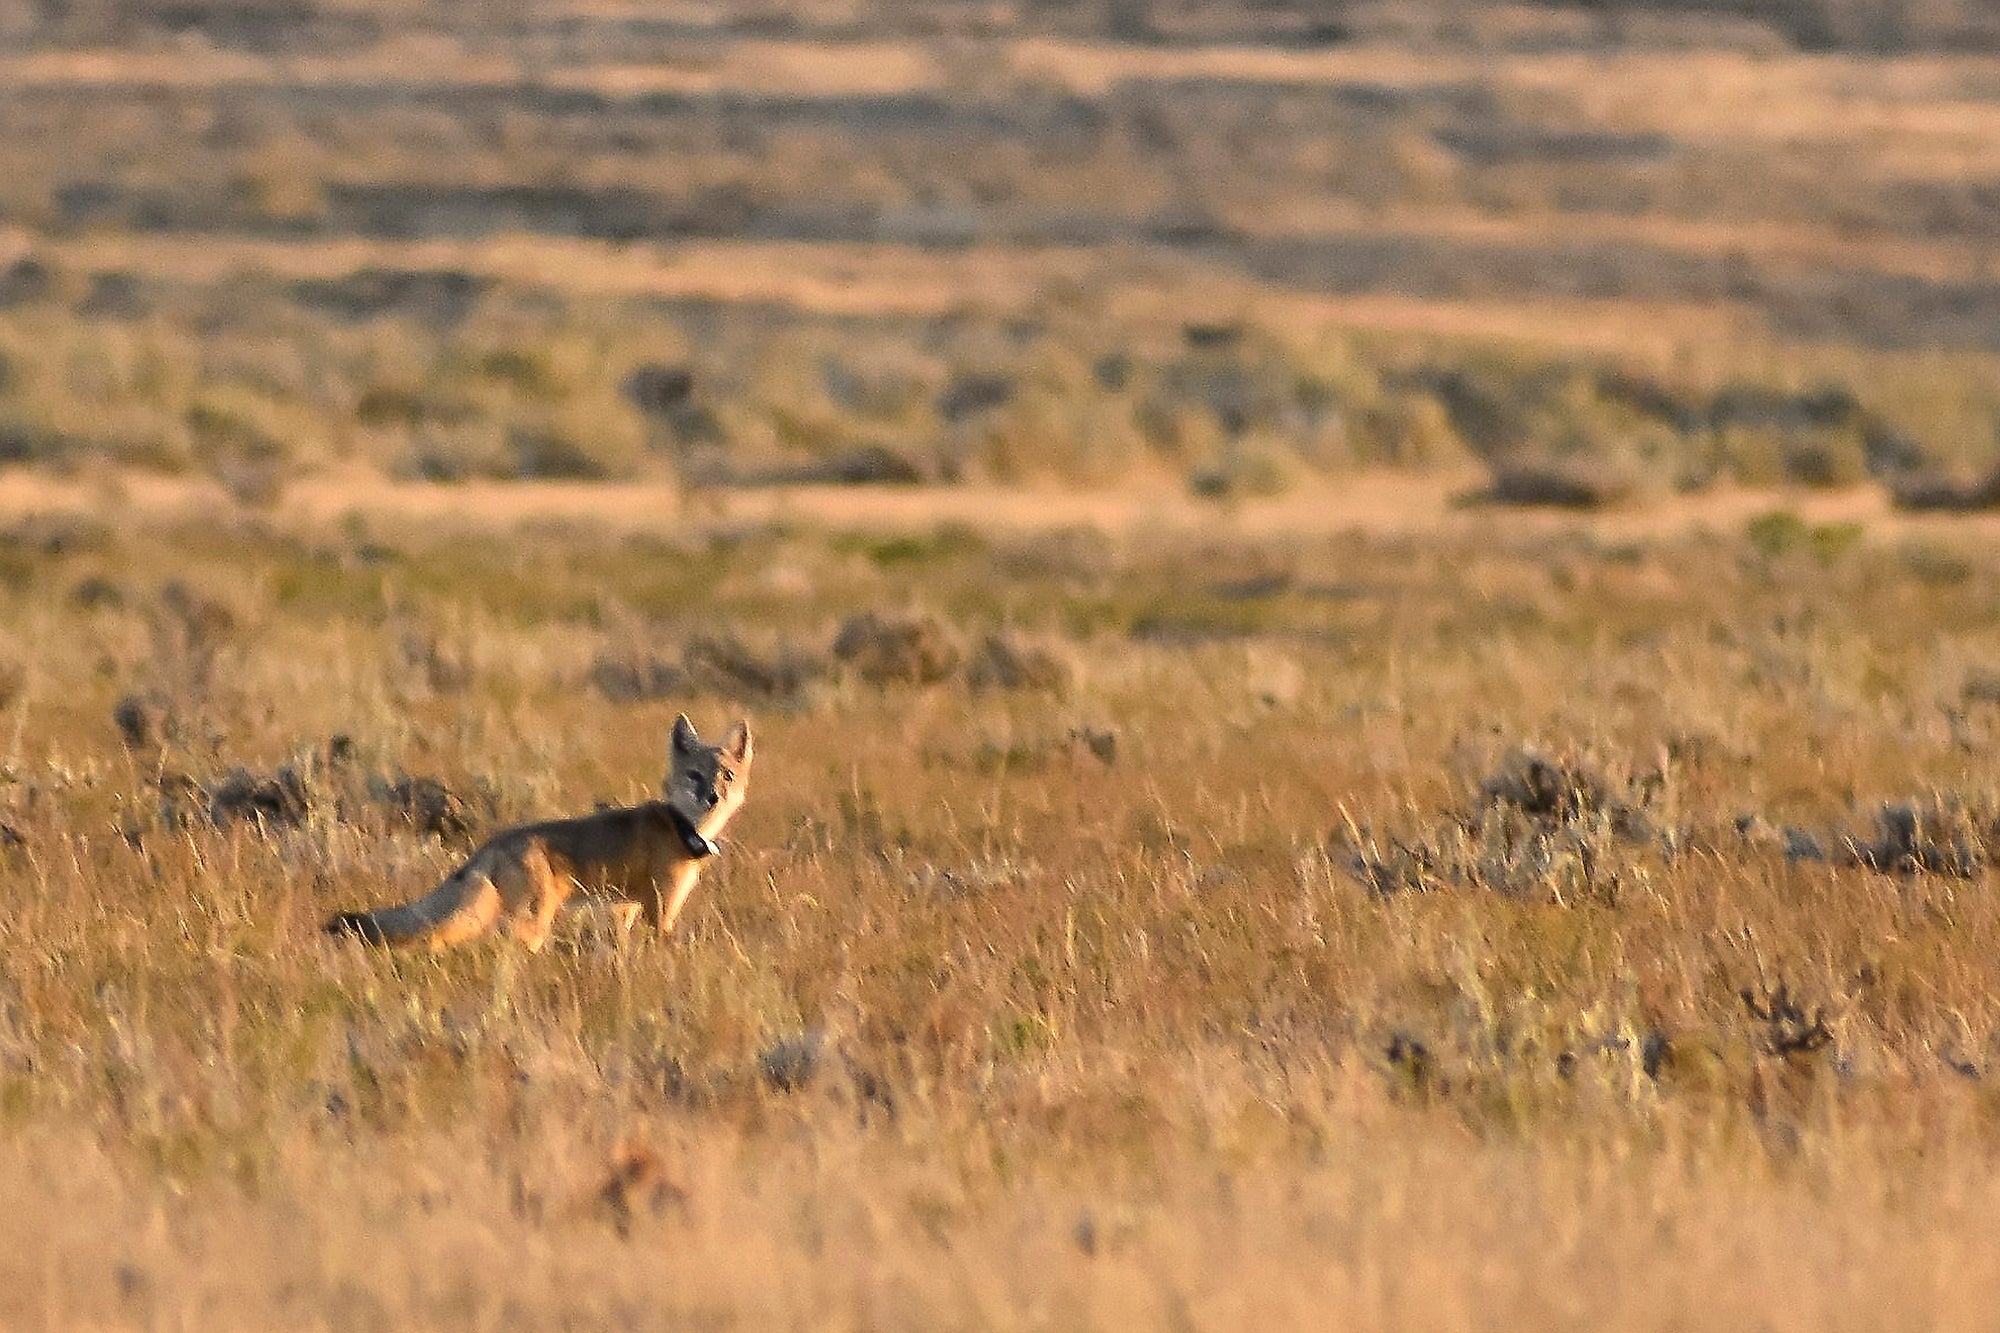 A fox looks at the camera from a dry, grassy field.